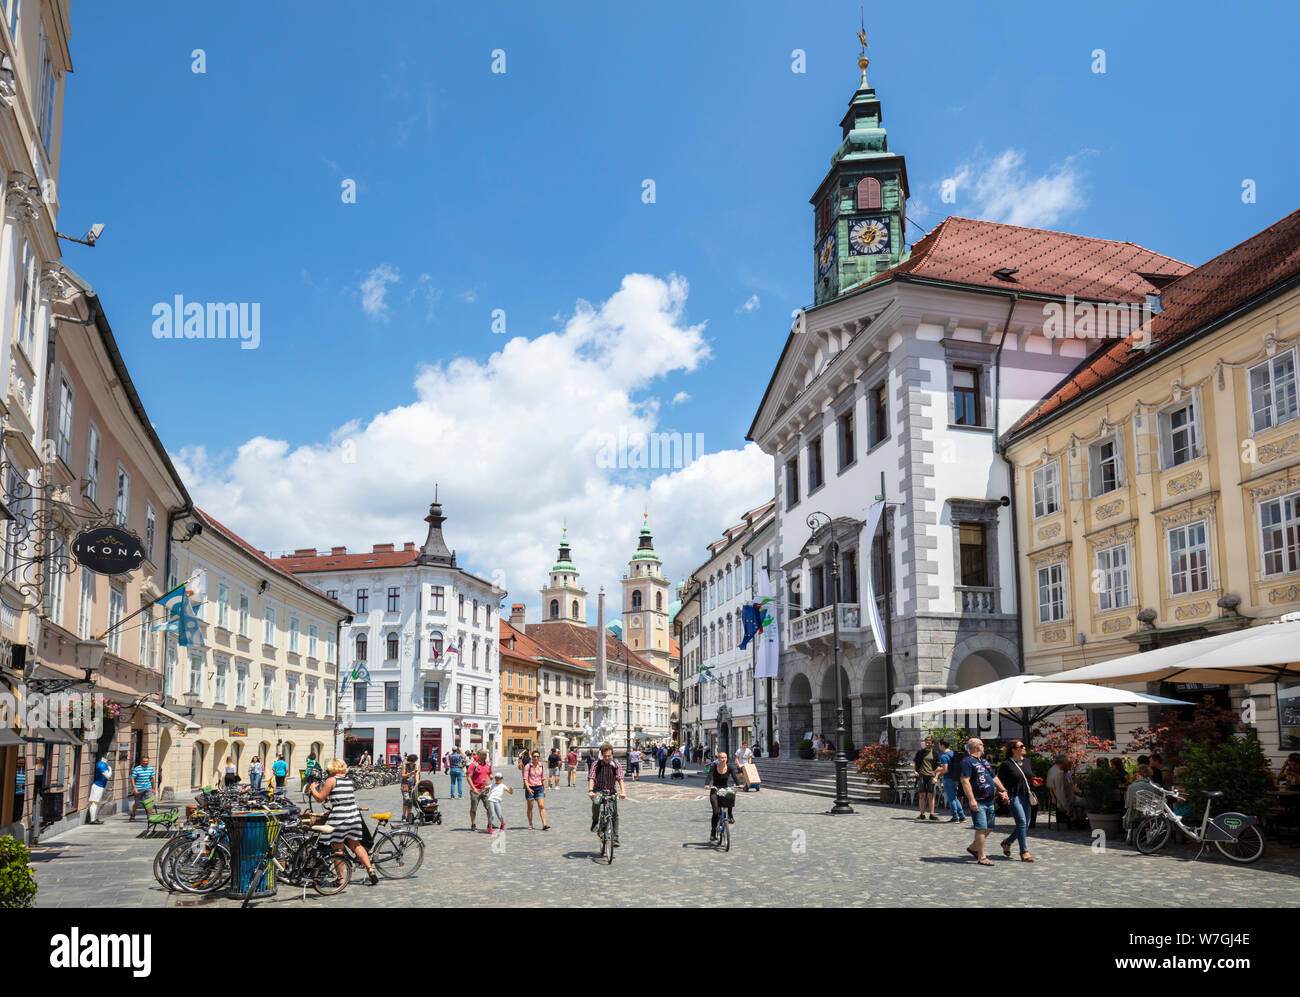 People tourists and cyclists in the Town Square in front of the Ljubljana Town Hall Stritarjeva ulica Old Town Ljubljana Slovenia Eu Europe Stock Photo